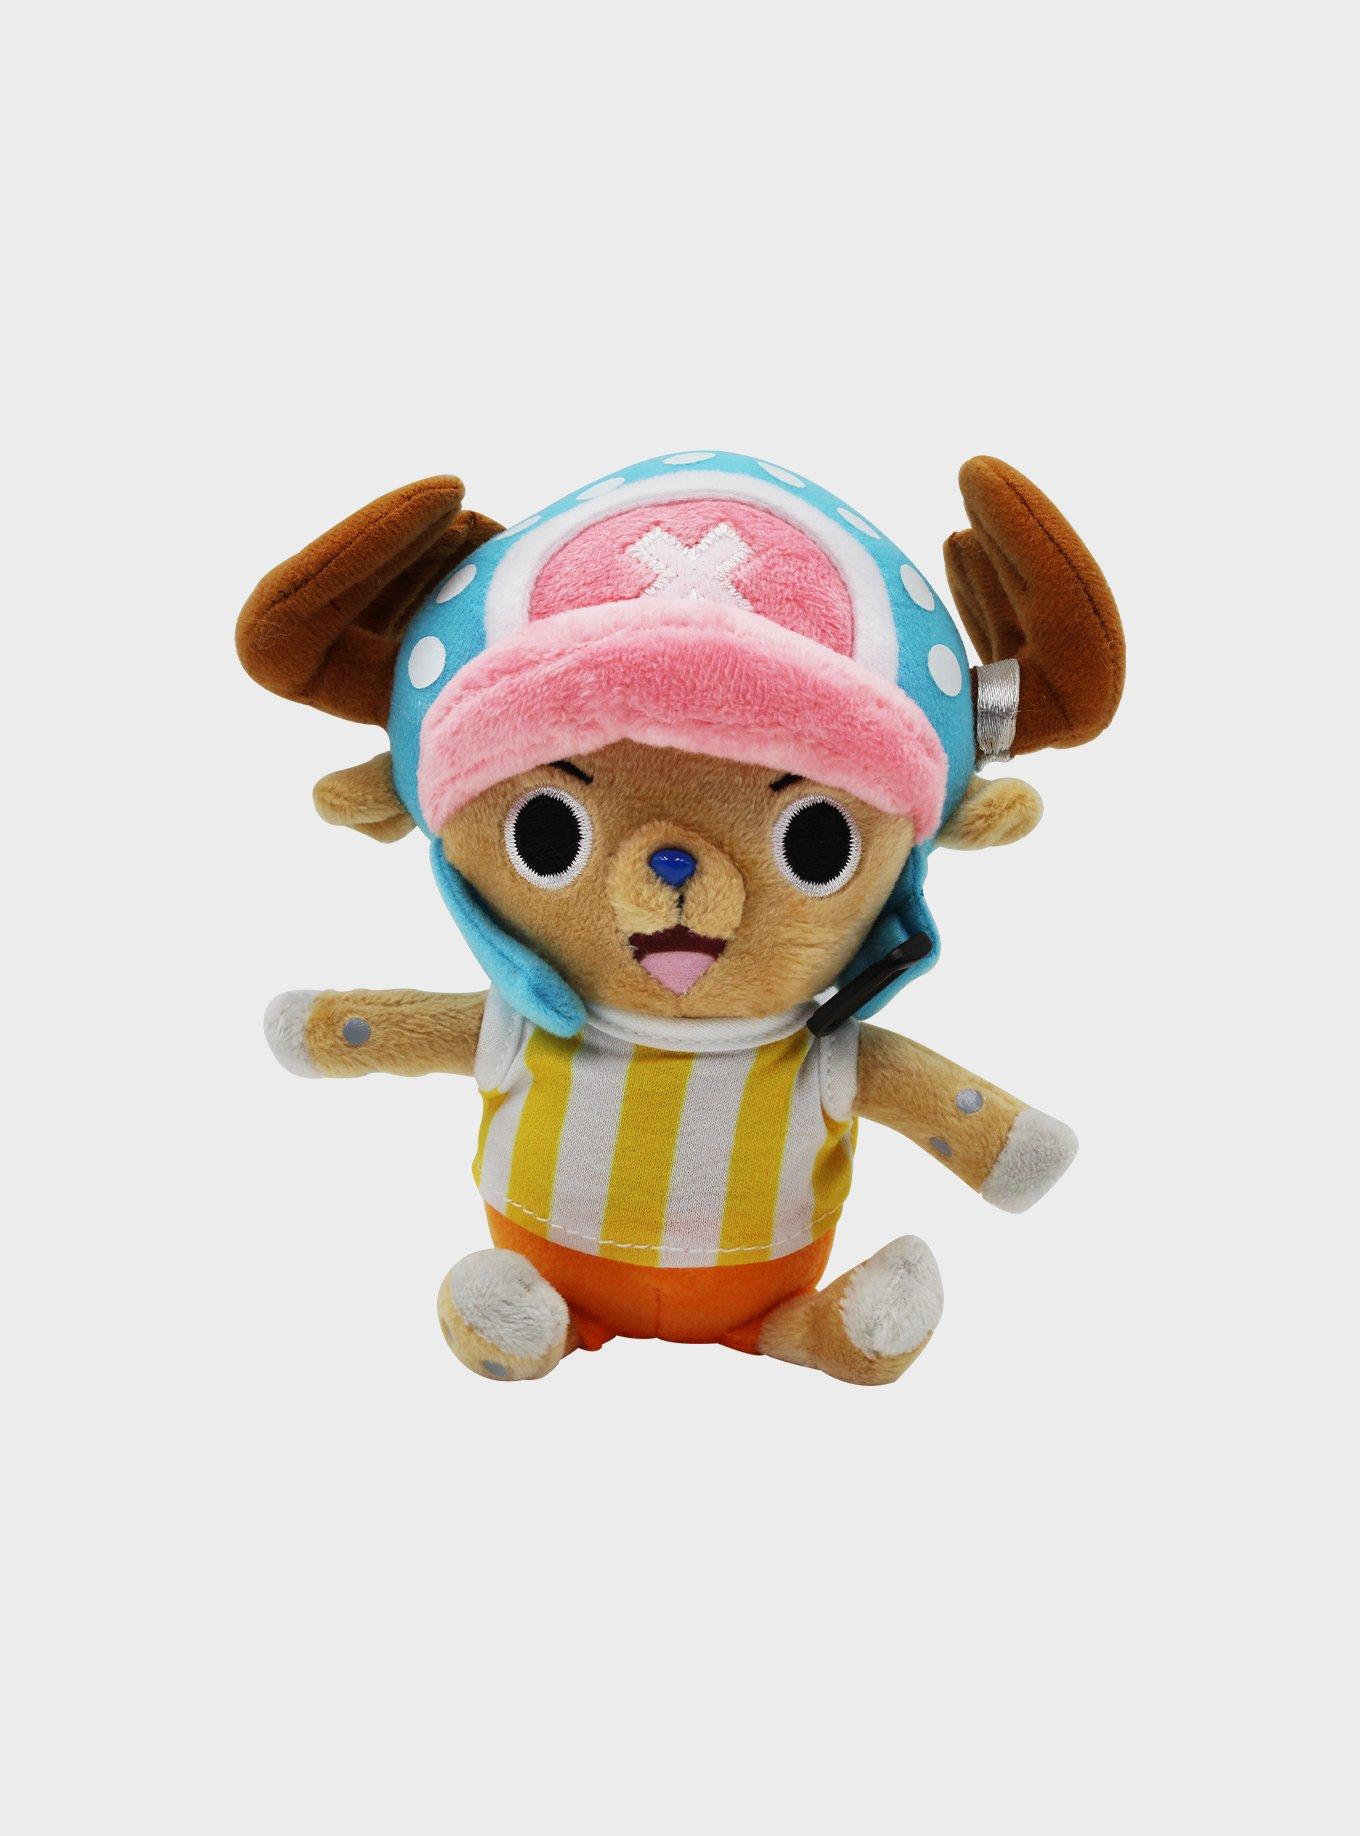 Is Chopper's Monster Point too nerfed in the New World? I know